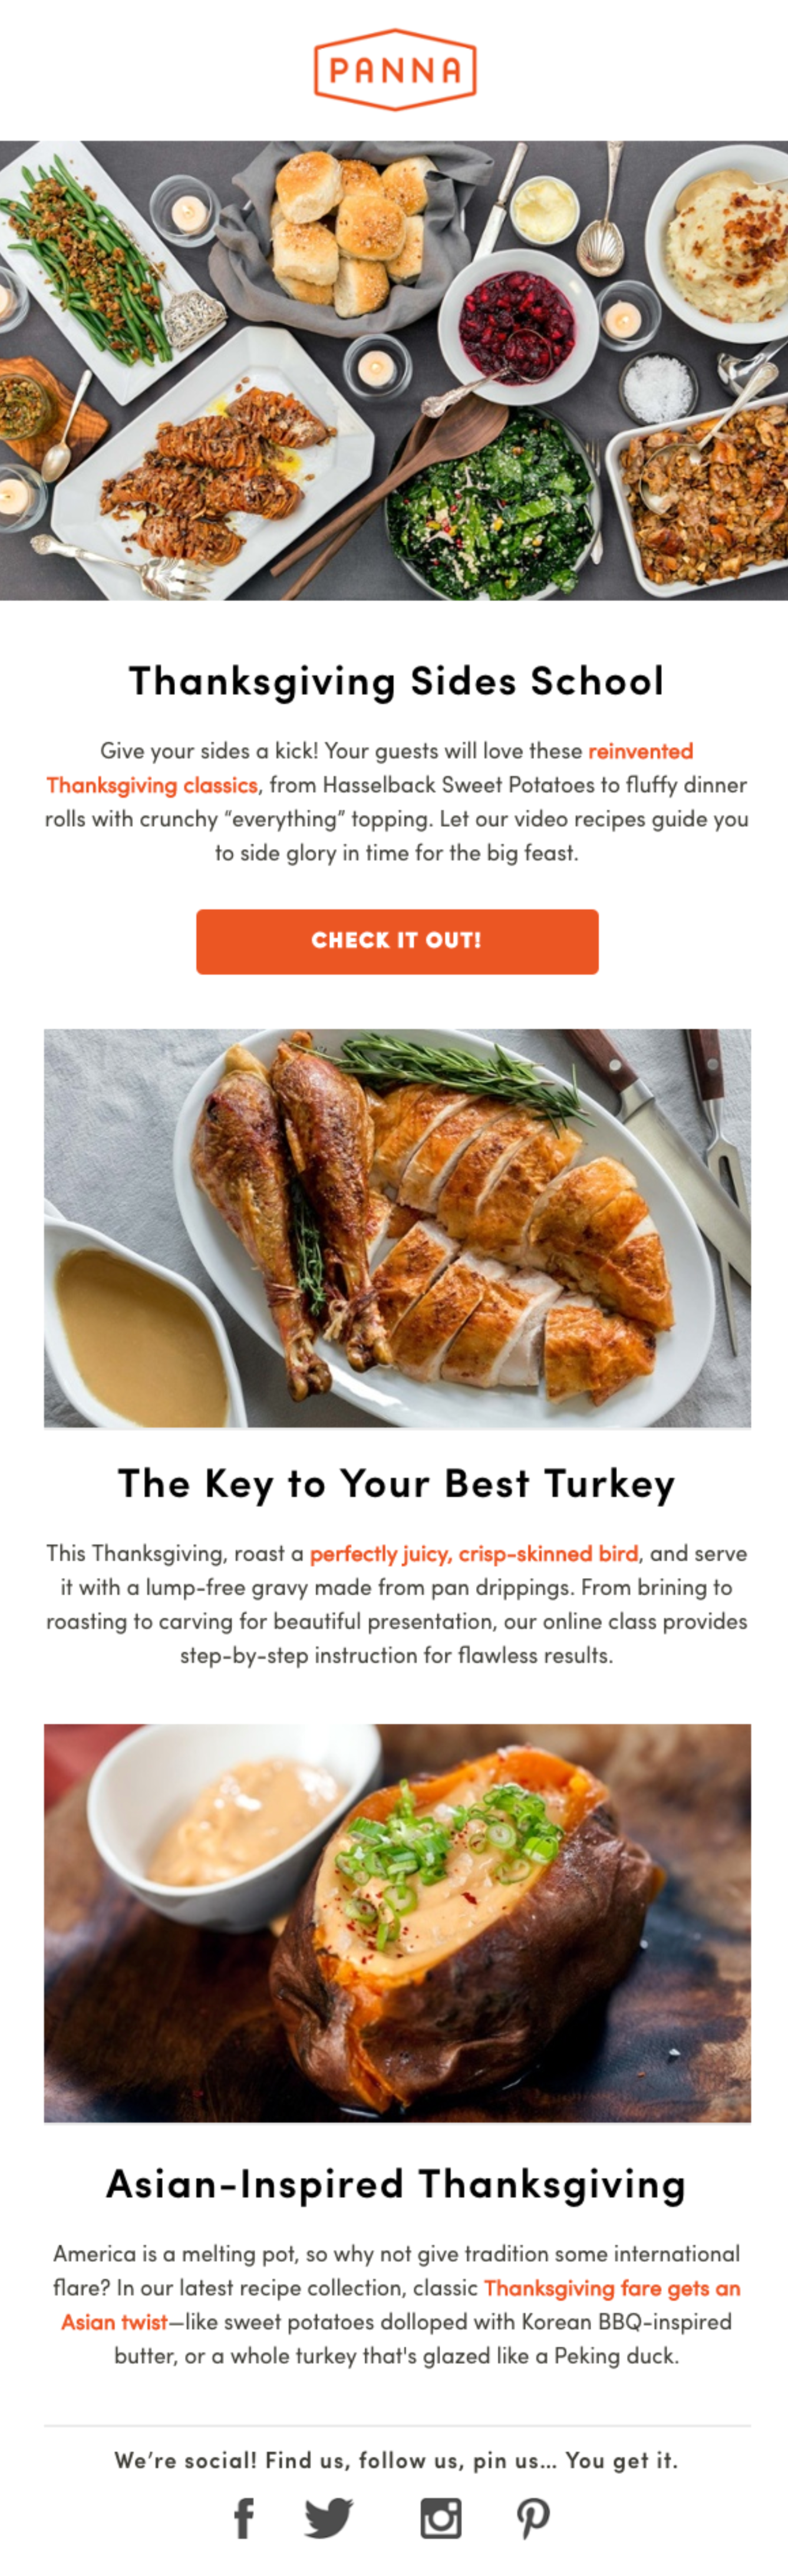 Panna offers helpful content for their Thanksgiving campaign